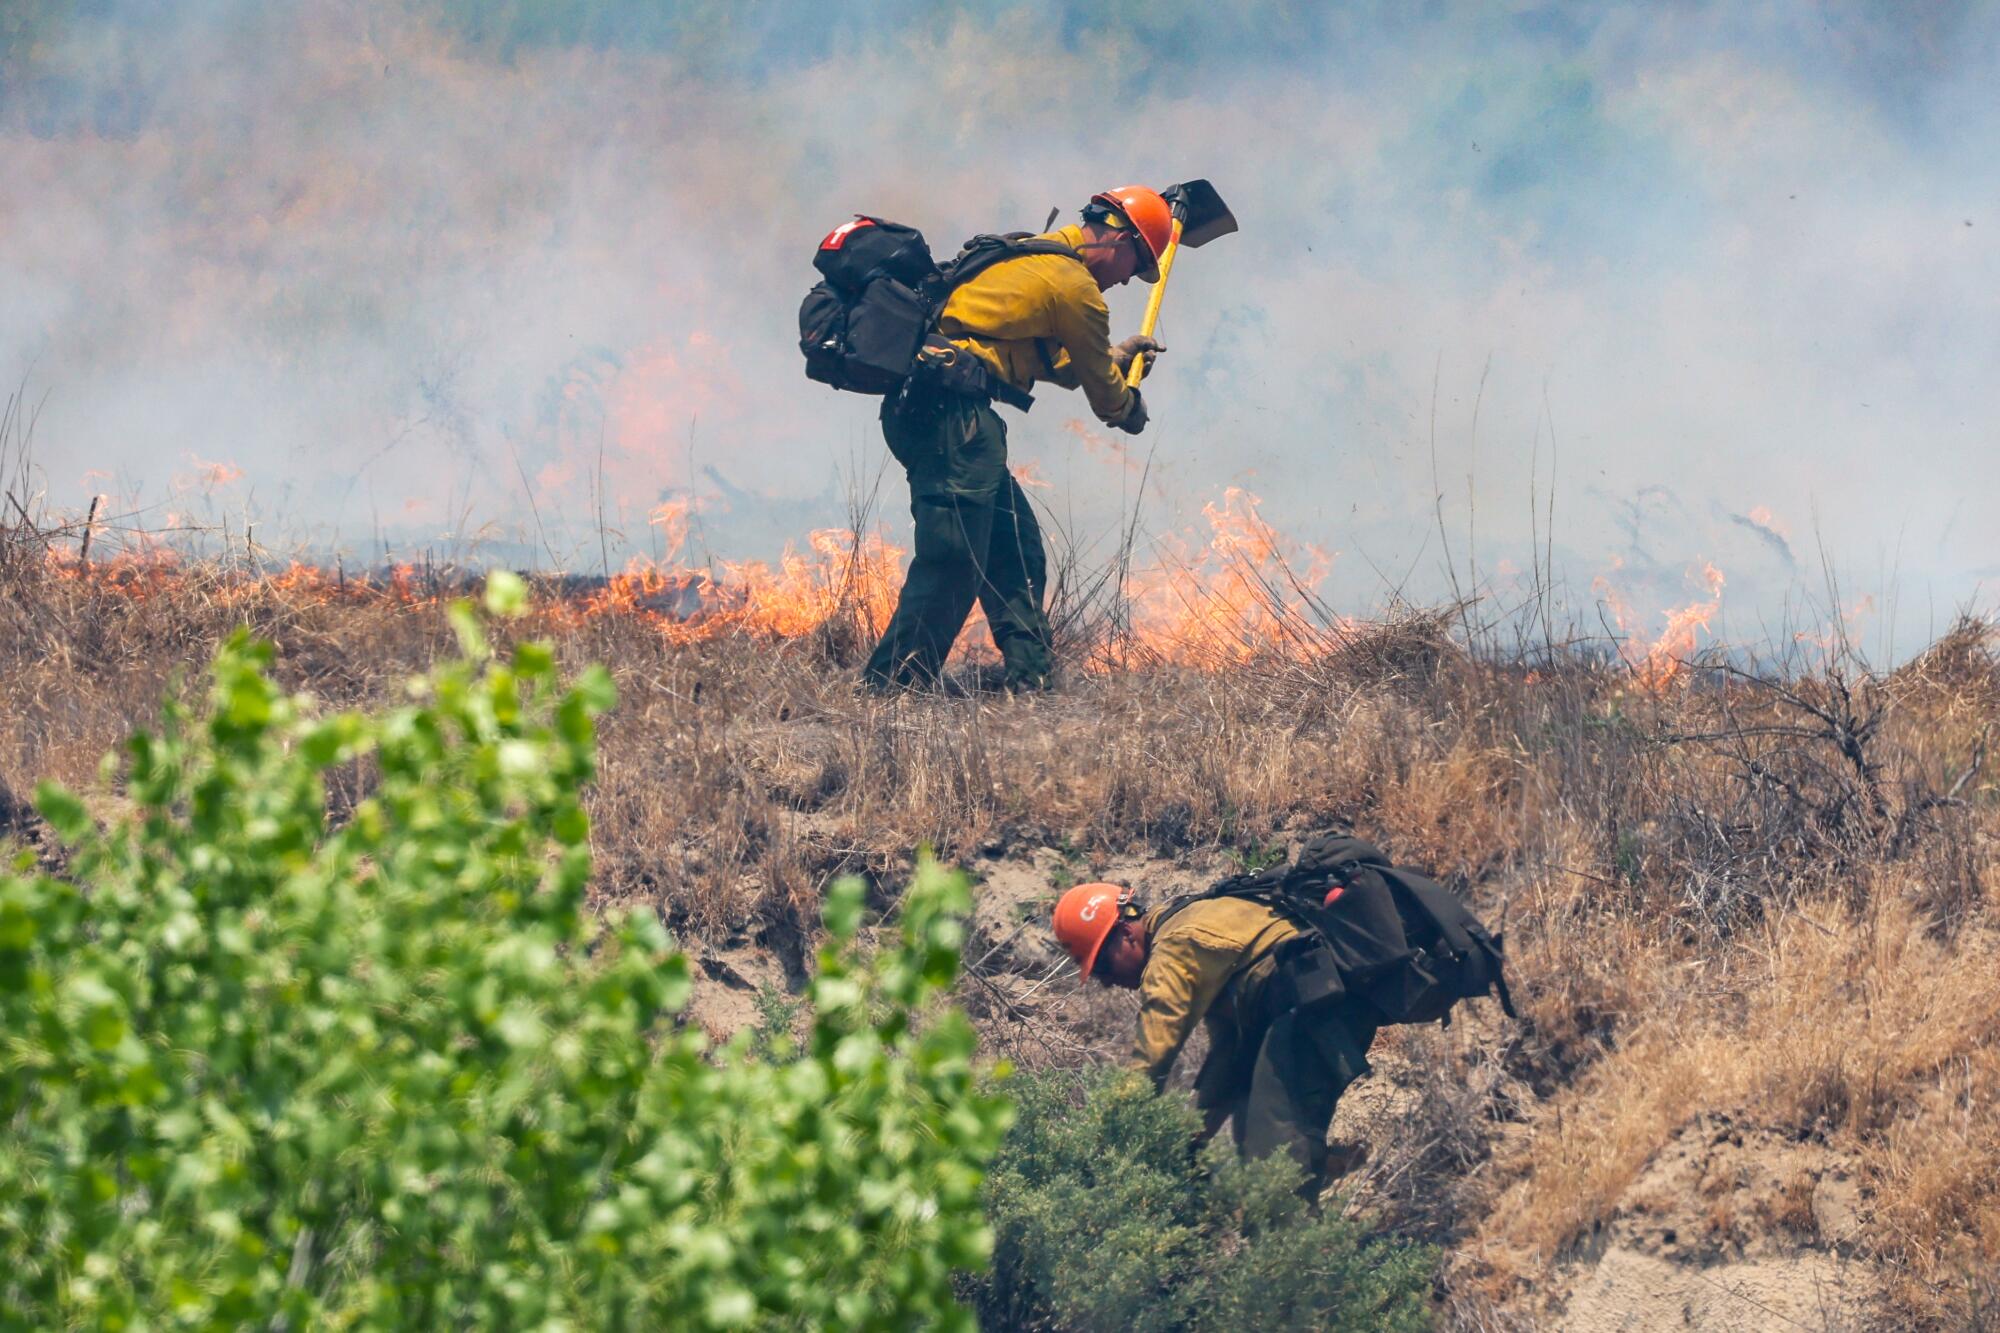 Crew members of the Little Tujunga Hot Shots work to control flames.